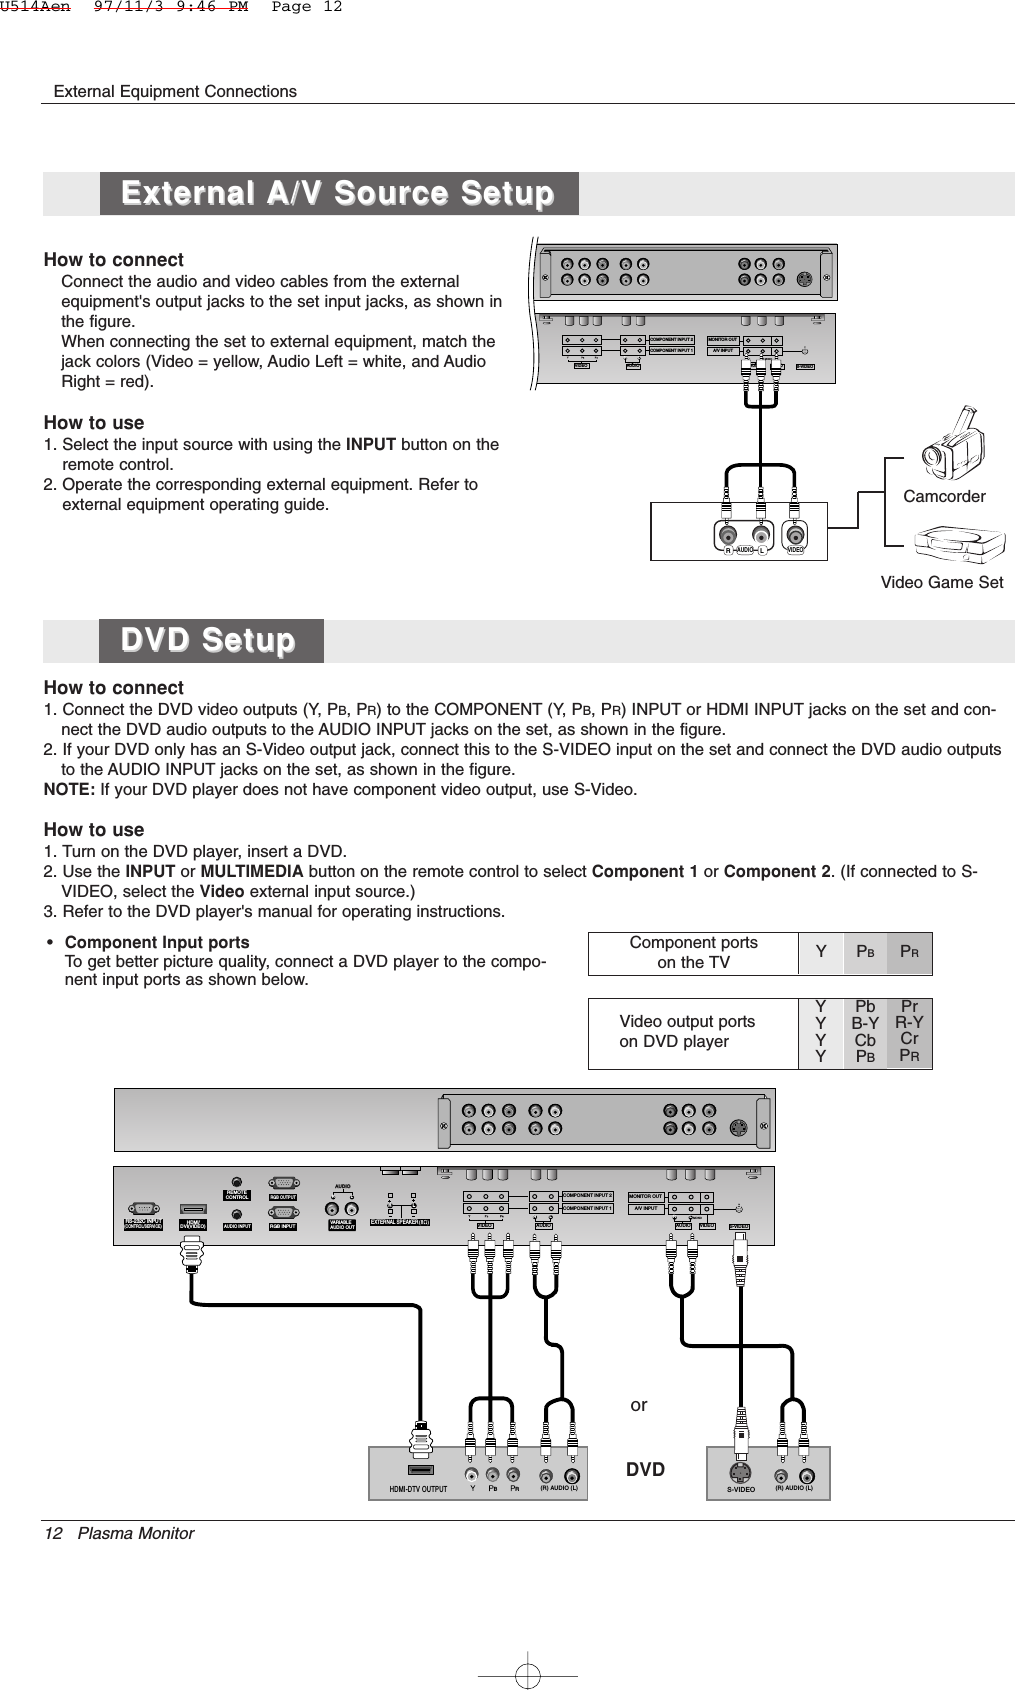 12 Plasma MonitorExternal Equipment Connections•Component Input portsTo get better picture quality, connect a DVD player to the compo-nent input ports as shown below.How to connectConnect the audio and video cables from the externalequipment&apos;s output jacks to the set input jacks, as shown inthe figure. When connecting the set to external equipment, match thejack colors (Video = yellow, Audio Left = white, and AudioRight = red).How to use1. Select the input source with using the INPUT button on theremote control.2. Operate the corresponding external equipment. Refer toexternal equipment operating guide.Component ports on the TV Y PBPRVideo output ports on DVD playerYYYYPbB-YCbPBPrR-YCrPRHow to connect1. Connect the DVD video outputs (Y, PB, PR) to the COMPONENT (Y, PB, PR) INPUT or HDMI INPUT jacks on the set and con-nect the DVD audio outputs to the AUDIO INPUT jacks on the set, as shown in the figure.2. If your DVD only has an S-Video output jack, connect this to the S-VIDEO input on the set and connect the DVD audio outputsto the AUDIO INPUT jacks on the set, as shown in the figure.NOTE: If your DVD player does not have component video output, use S-Video.How to use1. Turn on the DVD player, insert a DVD.2. Use the INPUT or MULTIMEDIA button on the remote control to select Component 1 or Component 2. (If connected to S-VIDEO, select the Video external input source.)3. Refer to the DVD player&apos;s manual for operating instructions.AUDIO VARIABLE AUDIO OUTS-VIDEOCOMPONENT INPUT 2COMPONENT INPUT 1AUDIOVIDEORLAUDIO VIDEORMONITOR OUTA/V INPUTLMONORLAUDIO VIDEORS-232C INPUT(CONTROL/SERVICE)AUDIO AUDIO LR REMOTECONTROLAUDIO INPUTRGB INPUT     HDMI/DVI(VIDEO)RGB OUTPUTS-VIDEOCOMPONENT INPUT 2COMPONENT INPUT 1AUDIOVIDEORLAUDIO VIDEORMONITOR OUTA/V INPUTLMONOVARIABLEAUDIO OUT    EXTERNAL SPEAKERRLBR(R) AUDIO (L) (R) AUDIO (L)S-VIDEOHDMI-DTV OUTPUTDVDorCamcorderVideo Game SetExternal External A/V Source SetupA/V Source SetupDVD SetupDVD SetupU514Aen  97/11/3 9:46 PM  Page 12